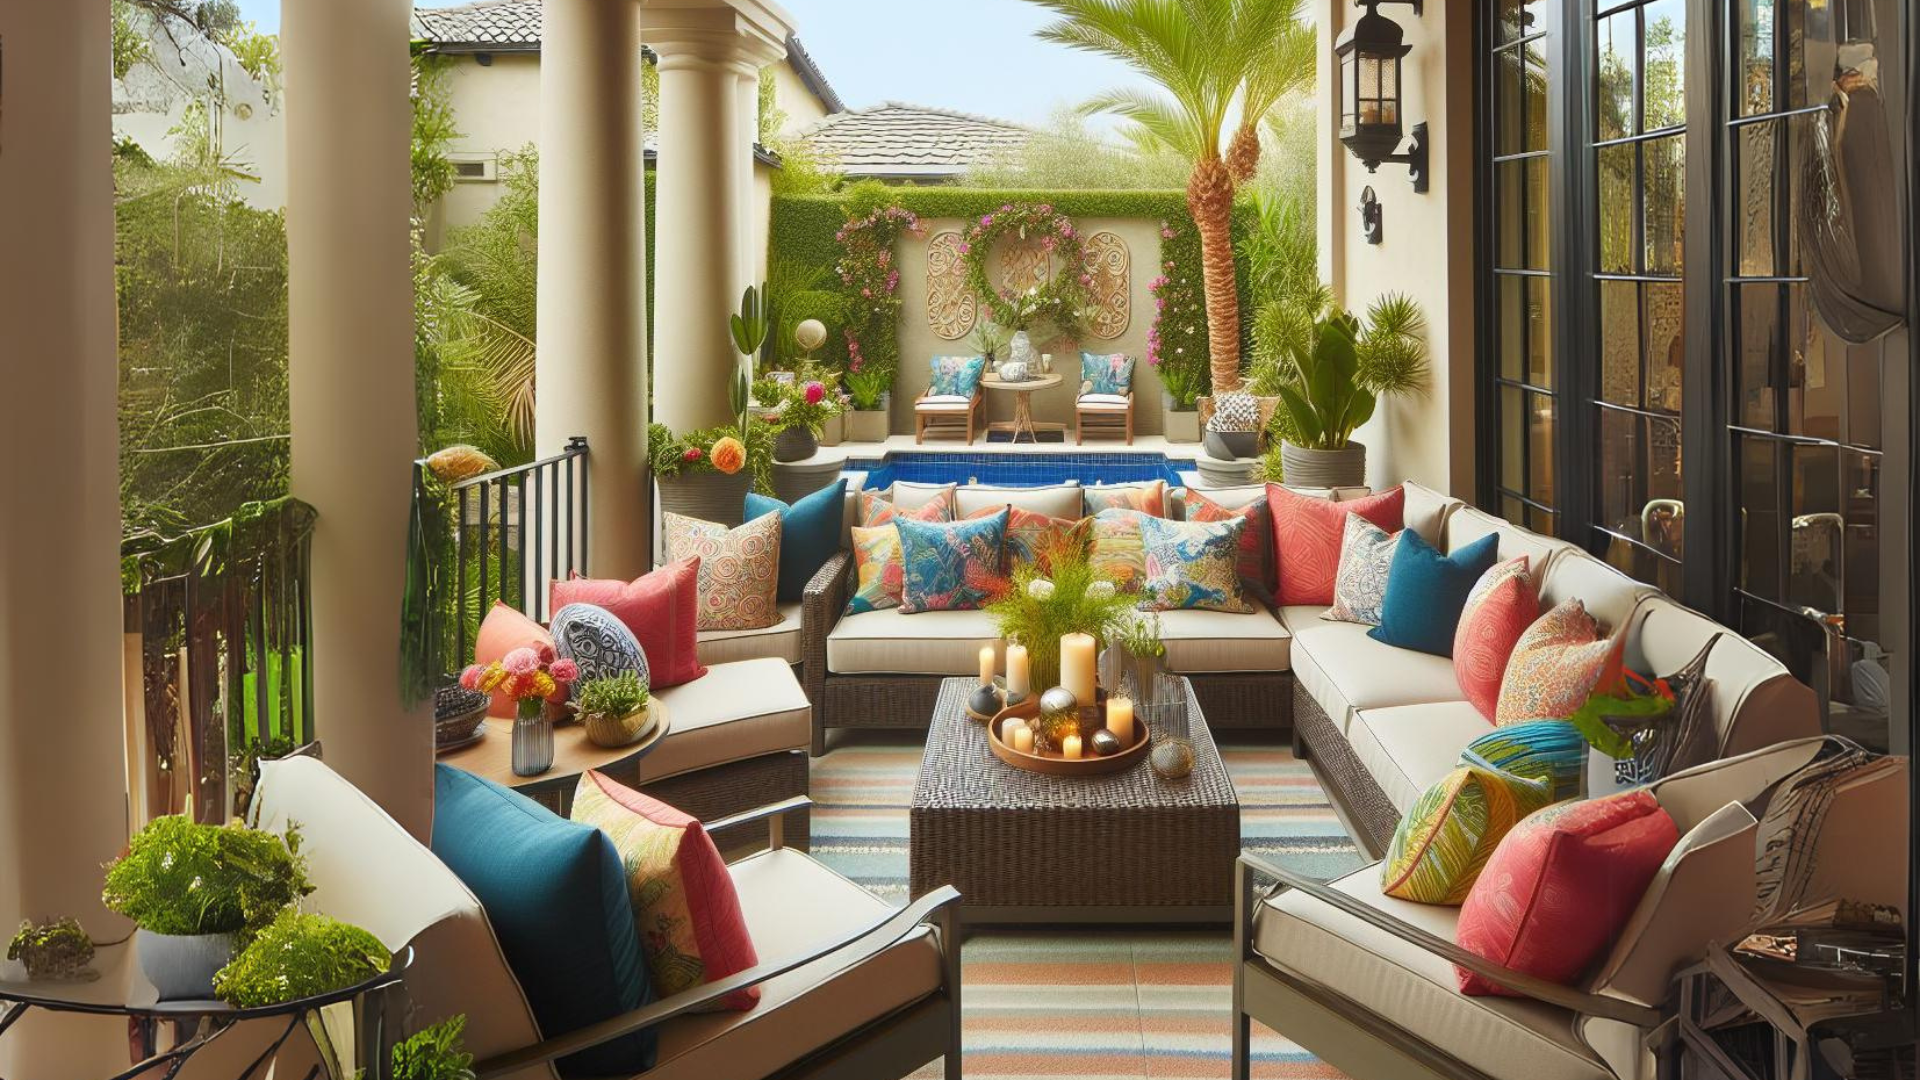 Custom Cushions for outdoor space